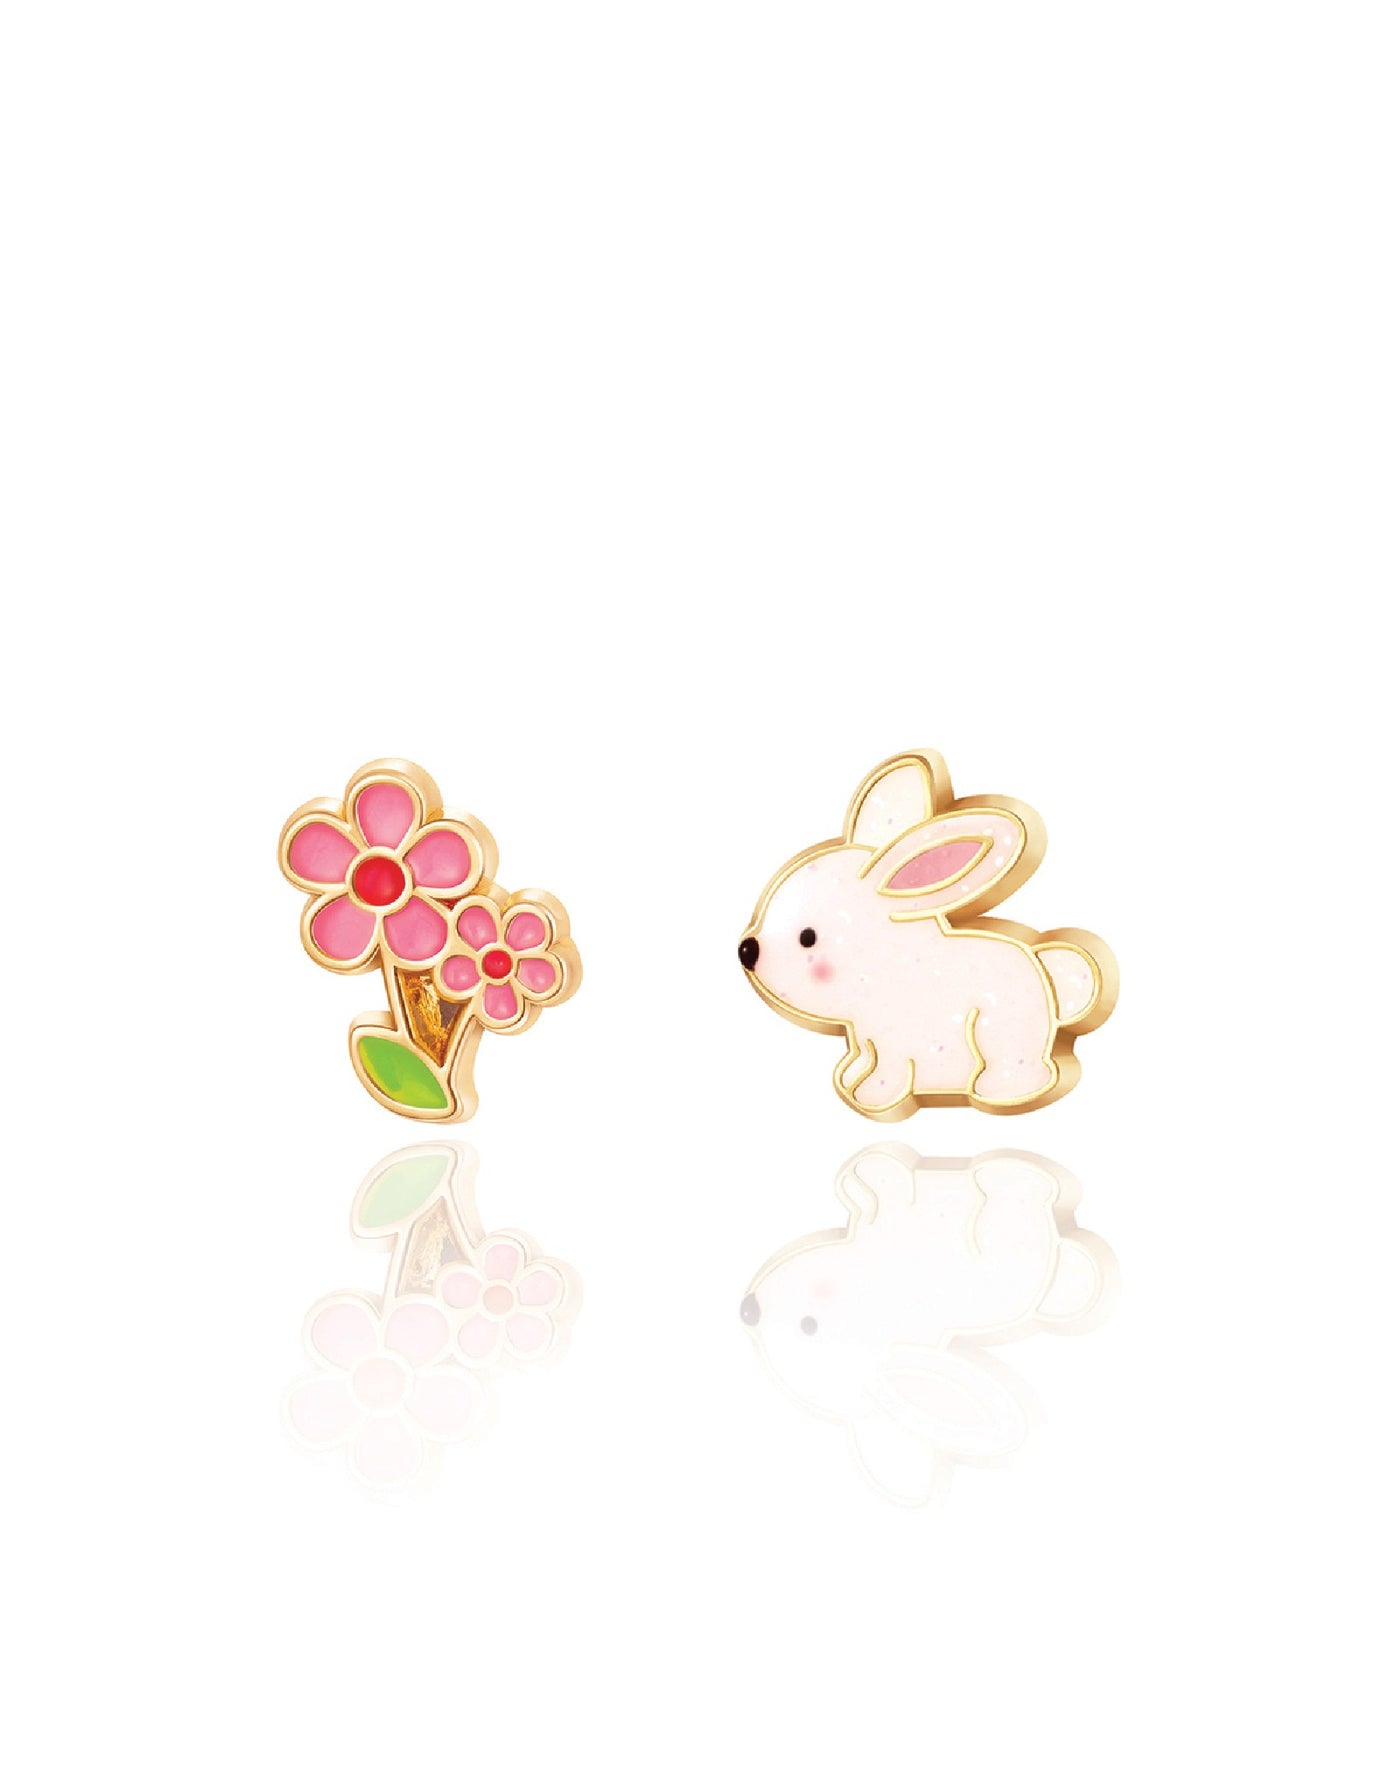 Enamel earrings (pack of 2) - Pink flowers and bunny - Girl Nation